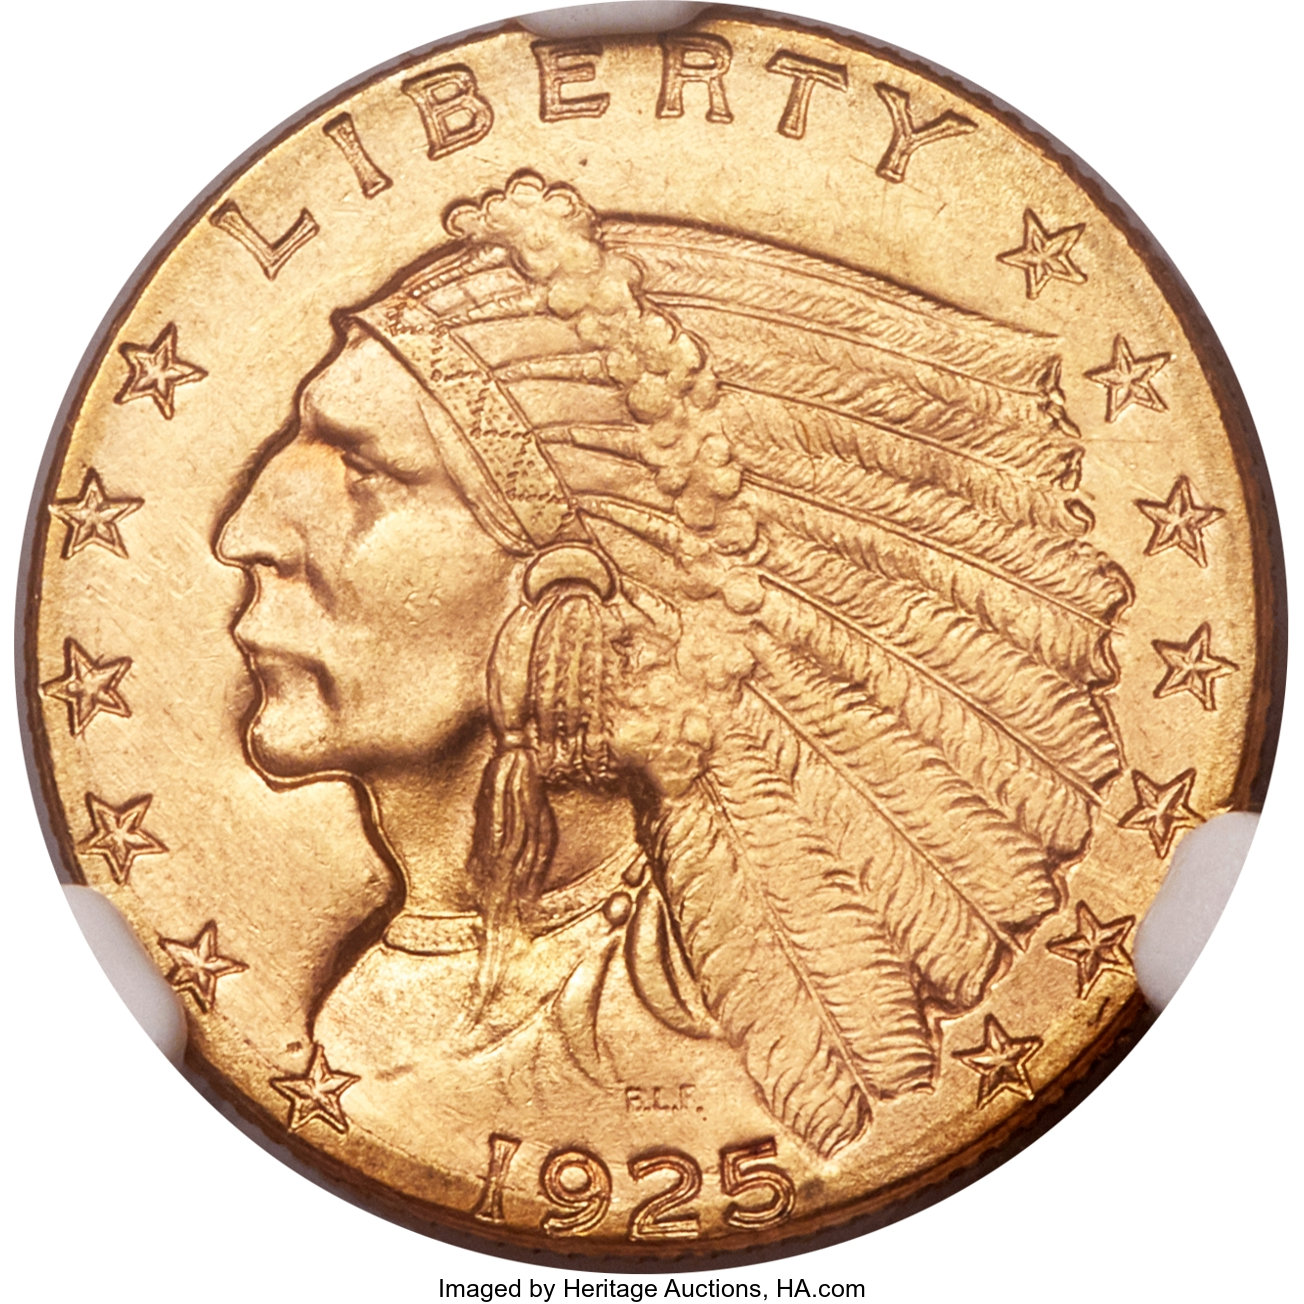 1925 D $2.50 Indian Gold Coin Pricing Guide | The Greysheet